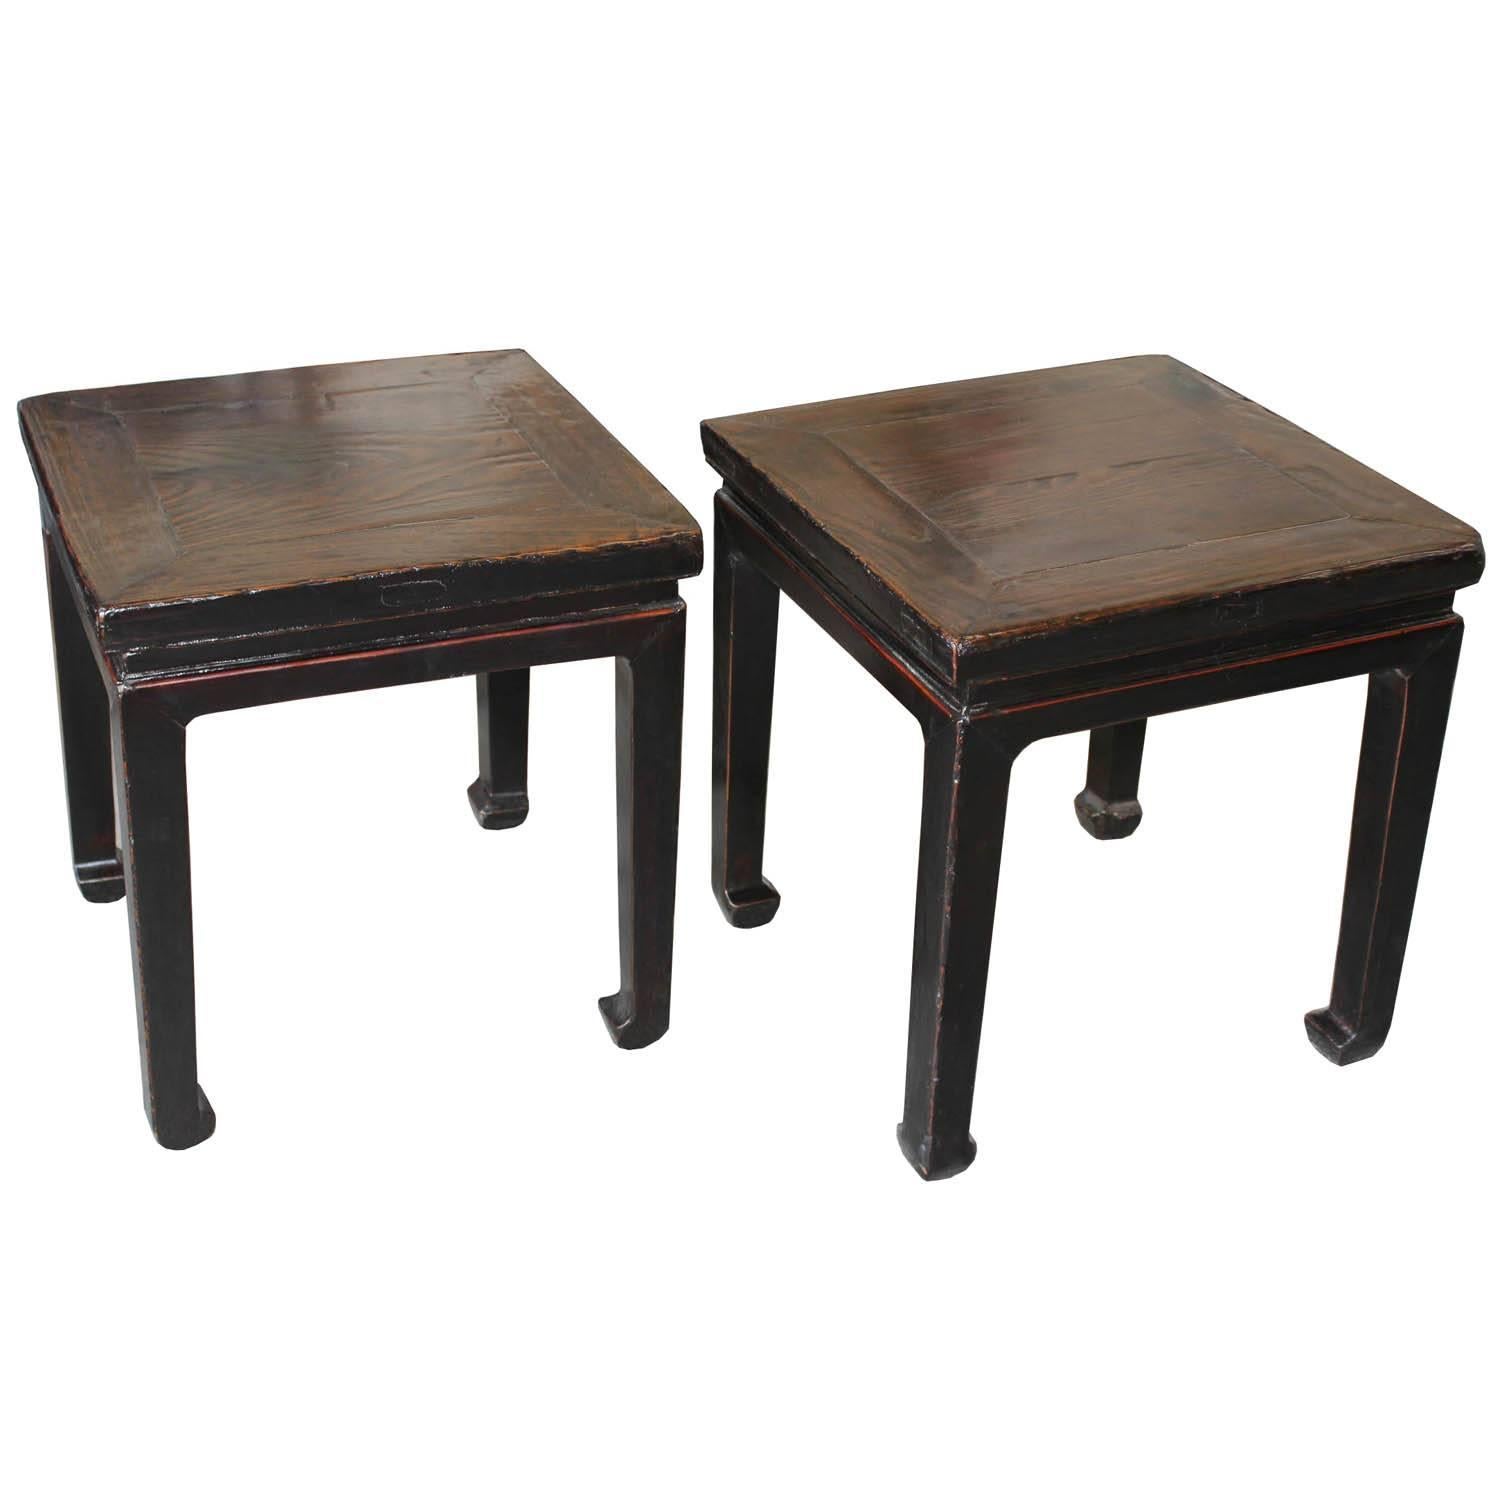 Two-tone Elm Ming style side table with beautiful elm grain has a recessed top and elegant horse hoof-style feet. Versatile to use as a coffee table in front of a sofa or as a side table next to armchairs. Priced individually.